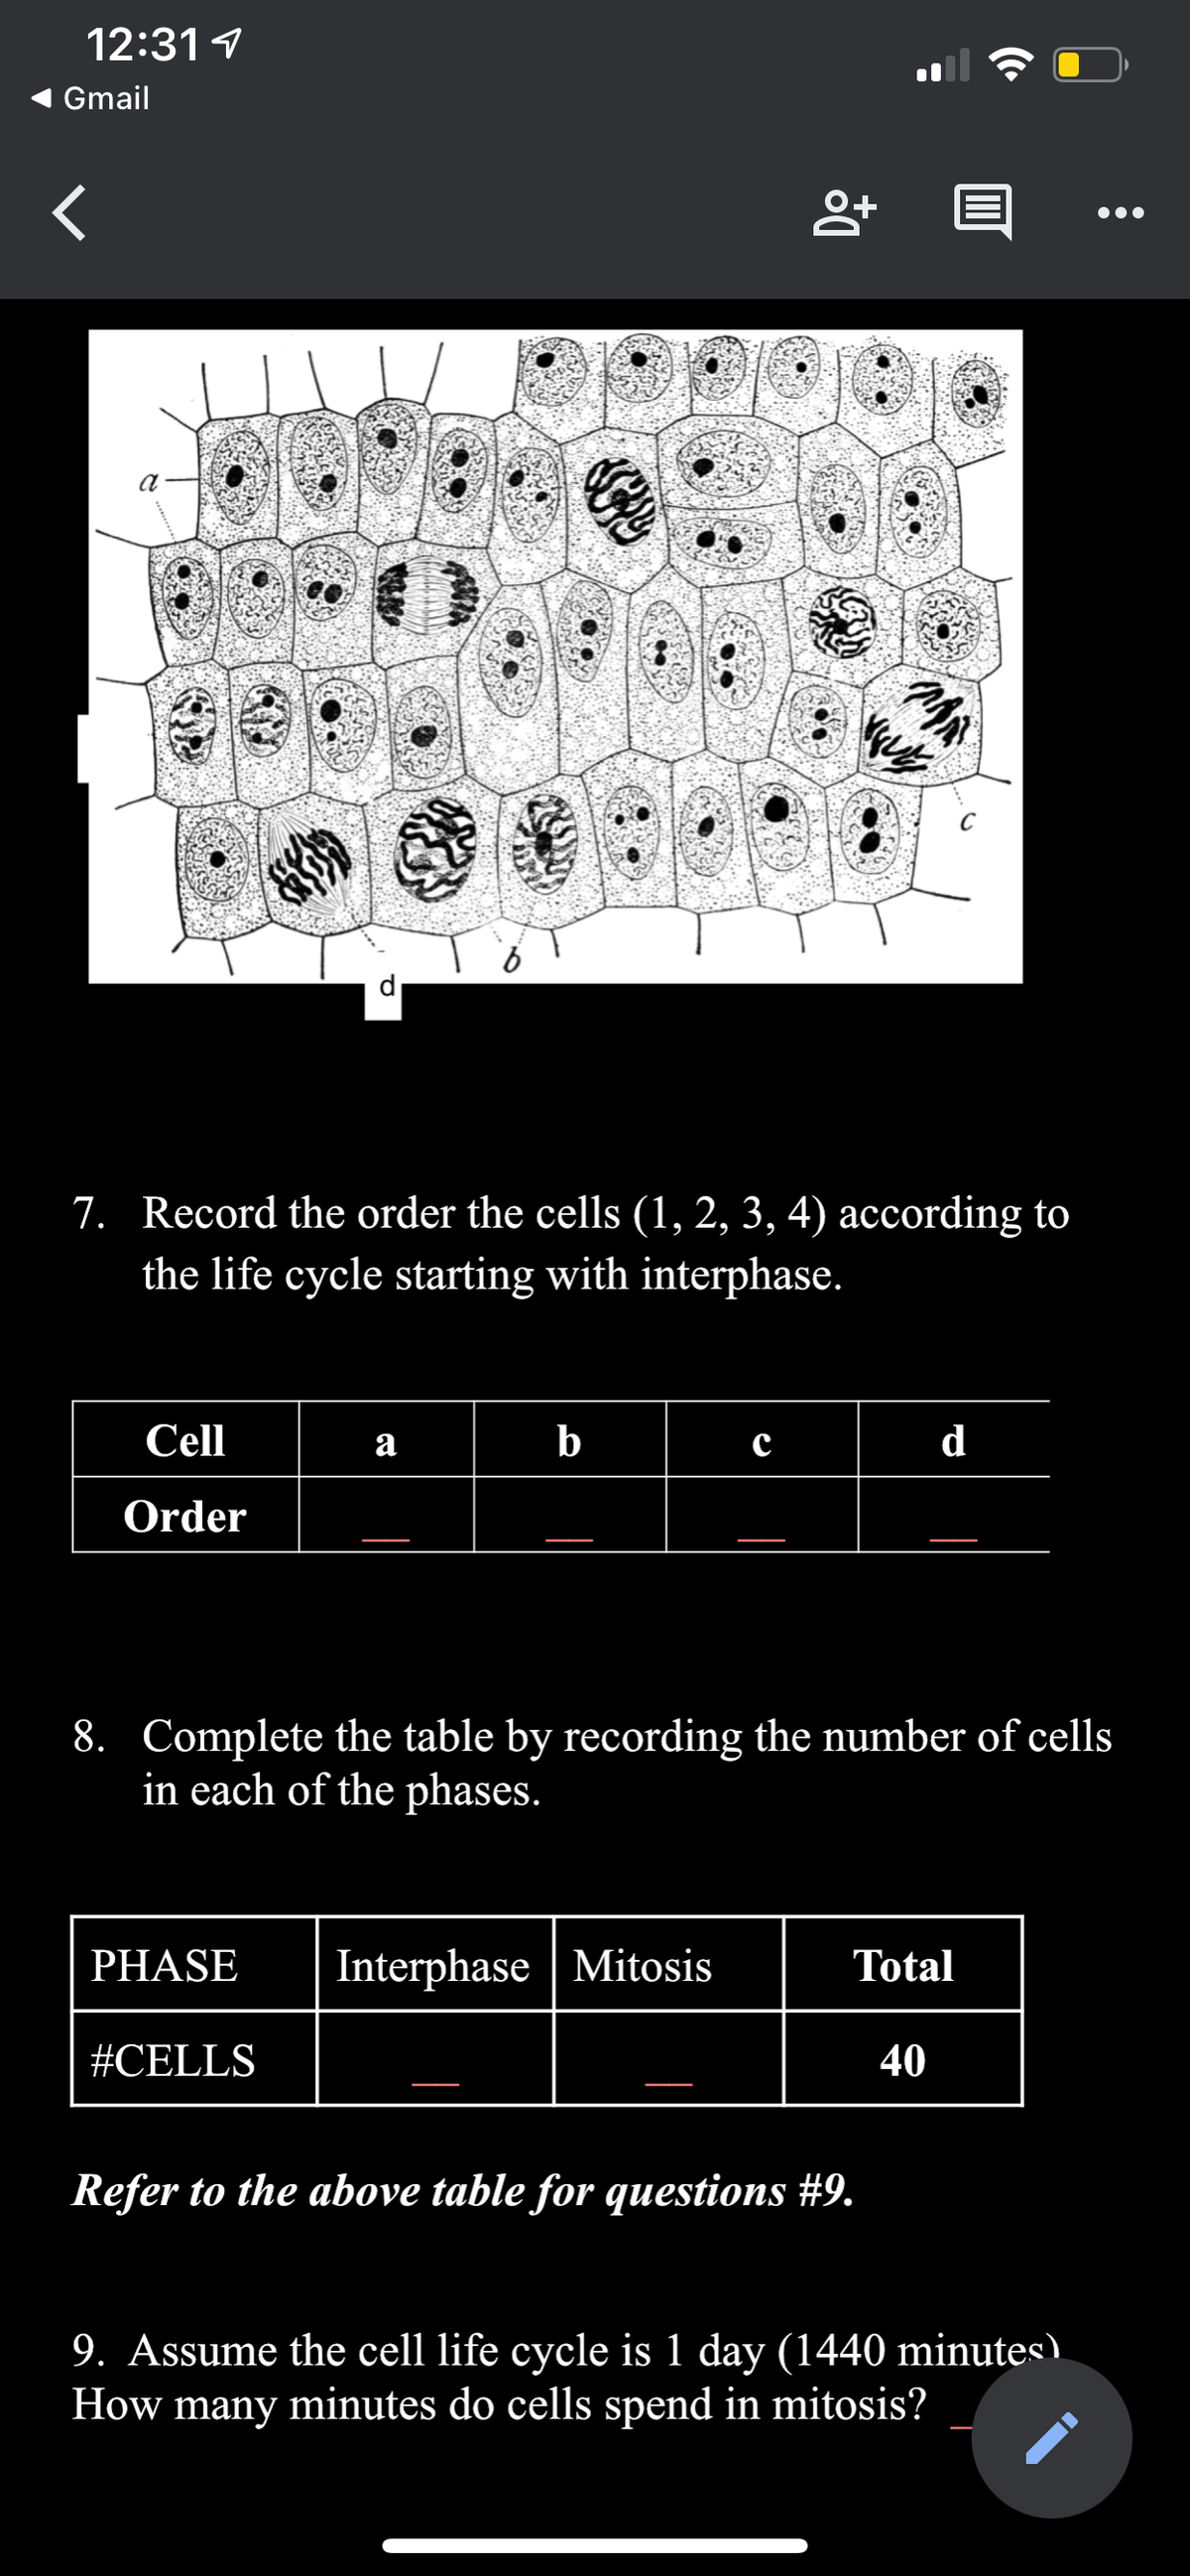 12:31 1
Gmail
d
7. Record the order the cells (1, 2, 3, 4) according to
the life cycle starting with interphase.
Cell
a
b
d
Order
8. Complete the table by recording the number of cells
in each of the phases.
PHASE
Interphase | Mitosis
Total
#CELLS
40
Refer to the above table for questions #9.
9. Assume the cell life cycle is 1 day (1440 minutes).
How many minutes do cells spend in mitosis?
